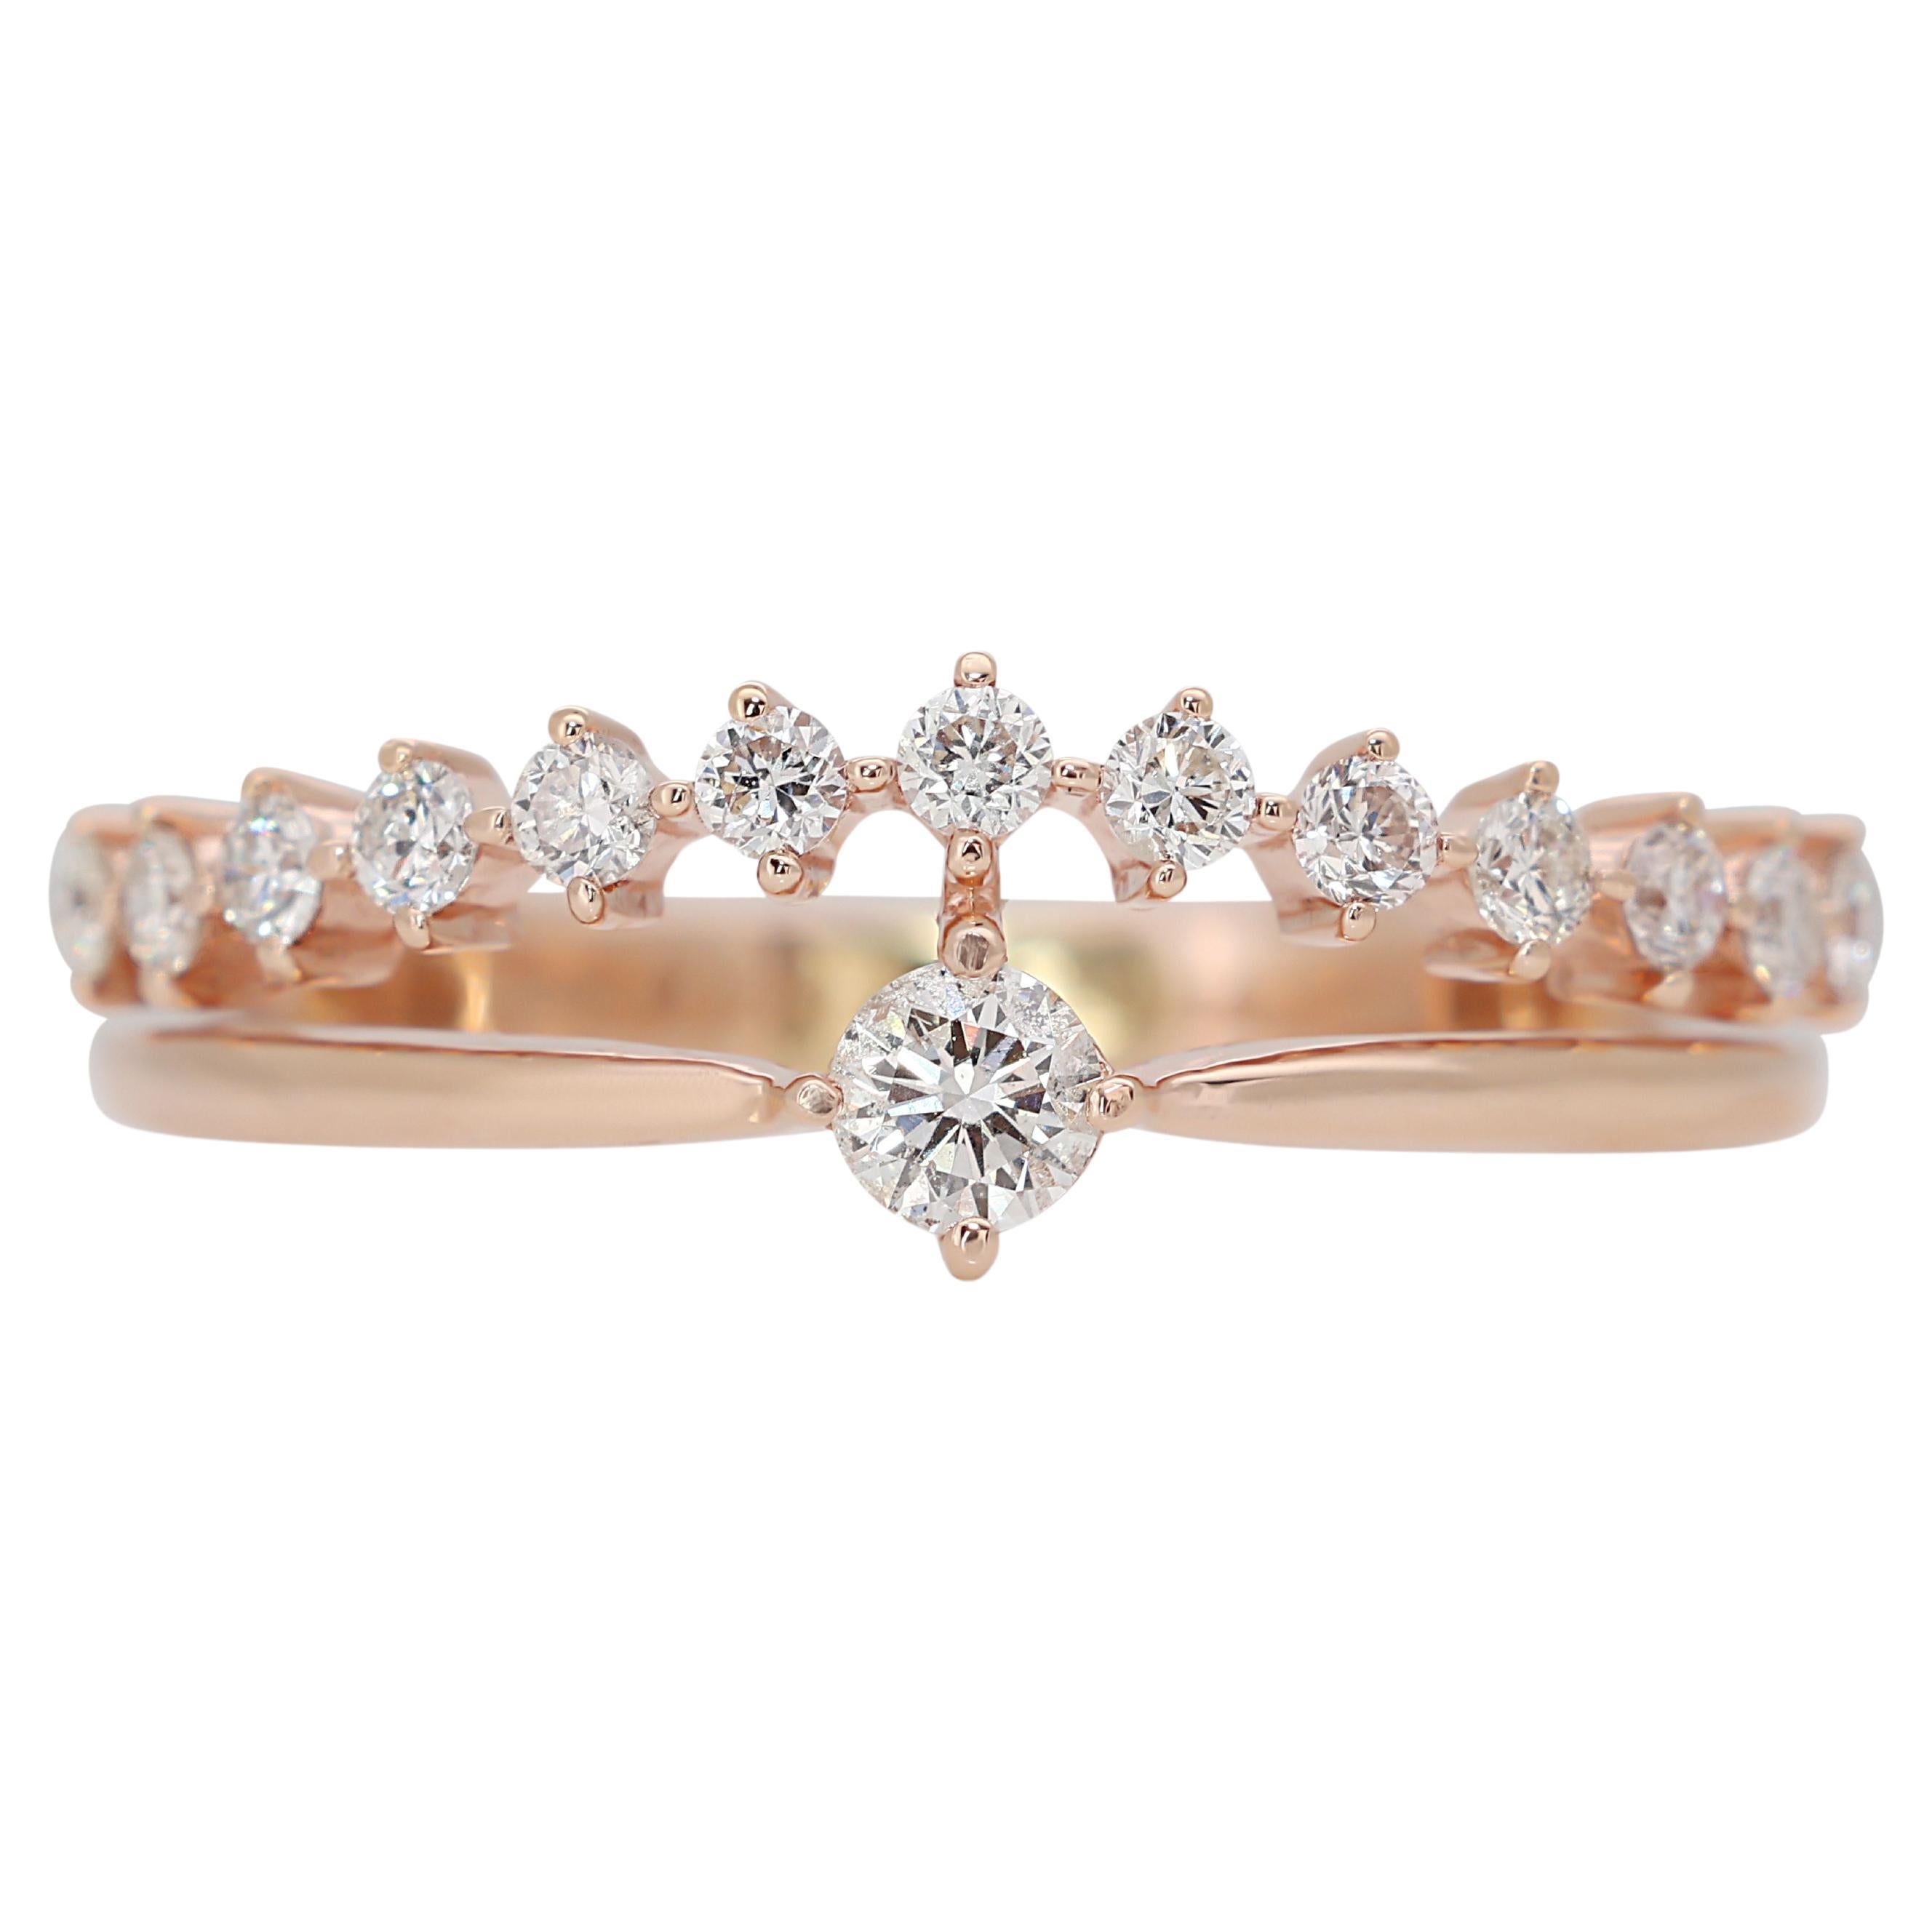 Beautiful 14k Rose Gold Crown Ring with 0.17 Ct Natural Diamonds